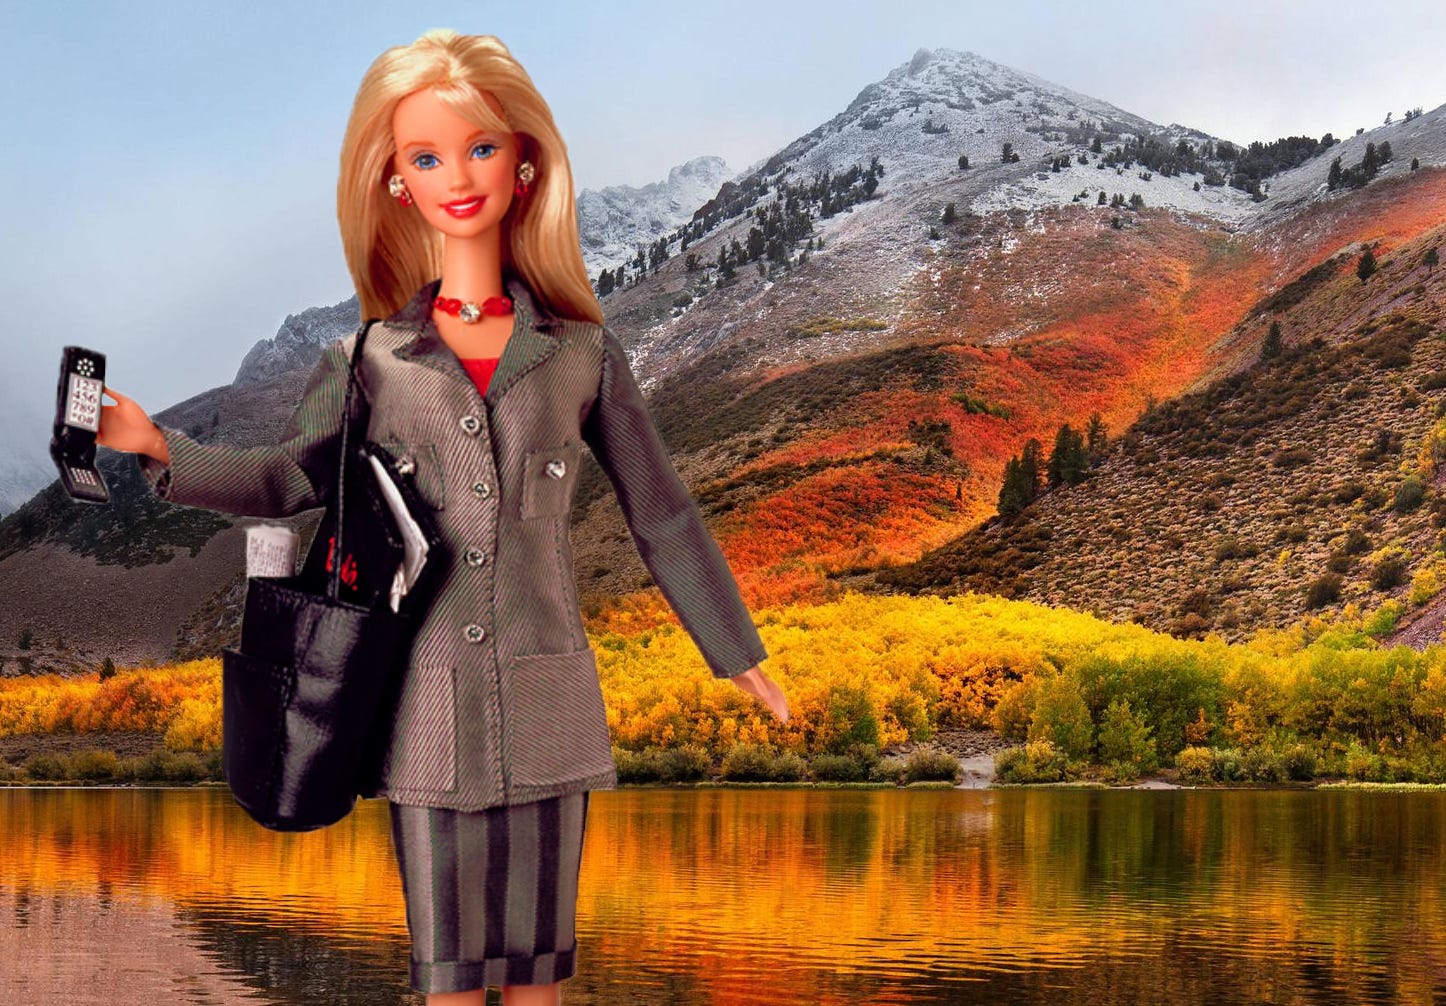 A fair skinned, blonde haired and blue eyed Barbie wears a grey skirt suit while holding a large purse and flip phone. Behind her is an expansive snowy mountain range with orange and yellow fall foliage.